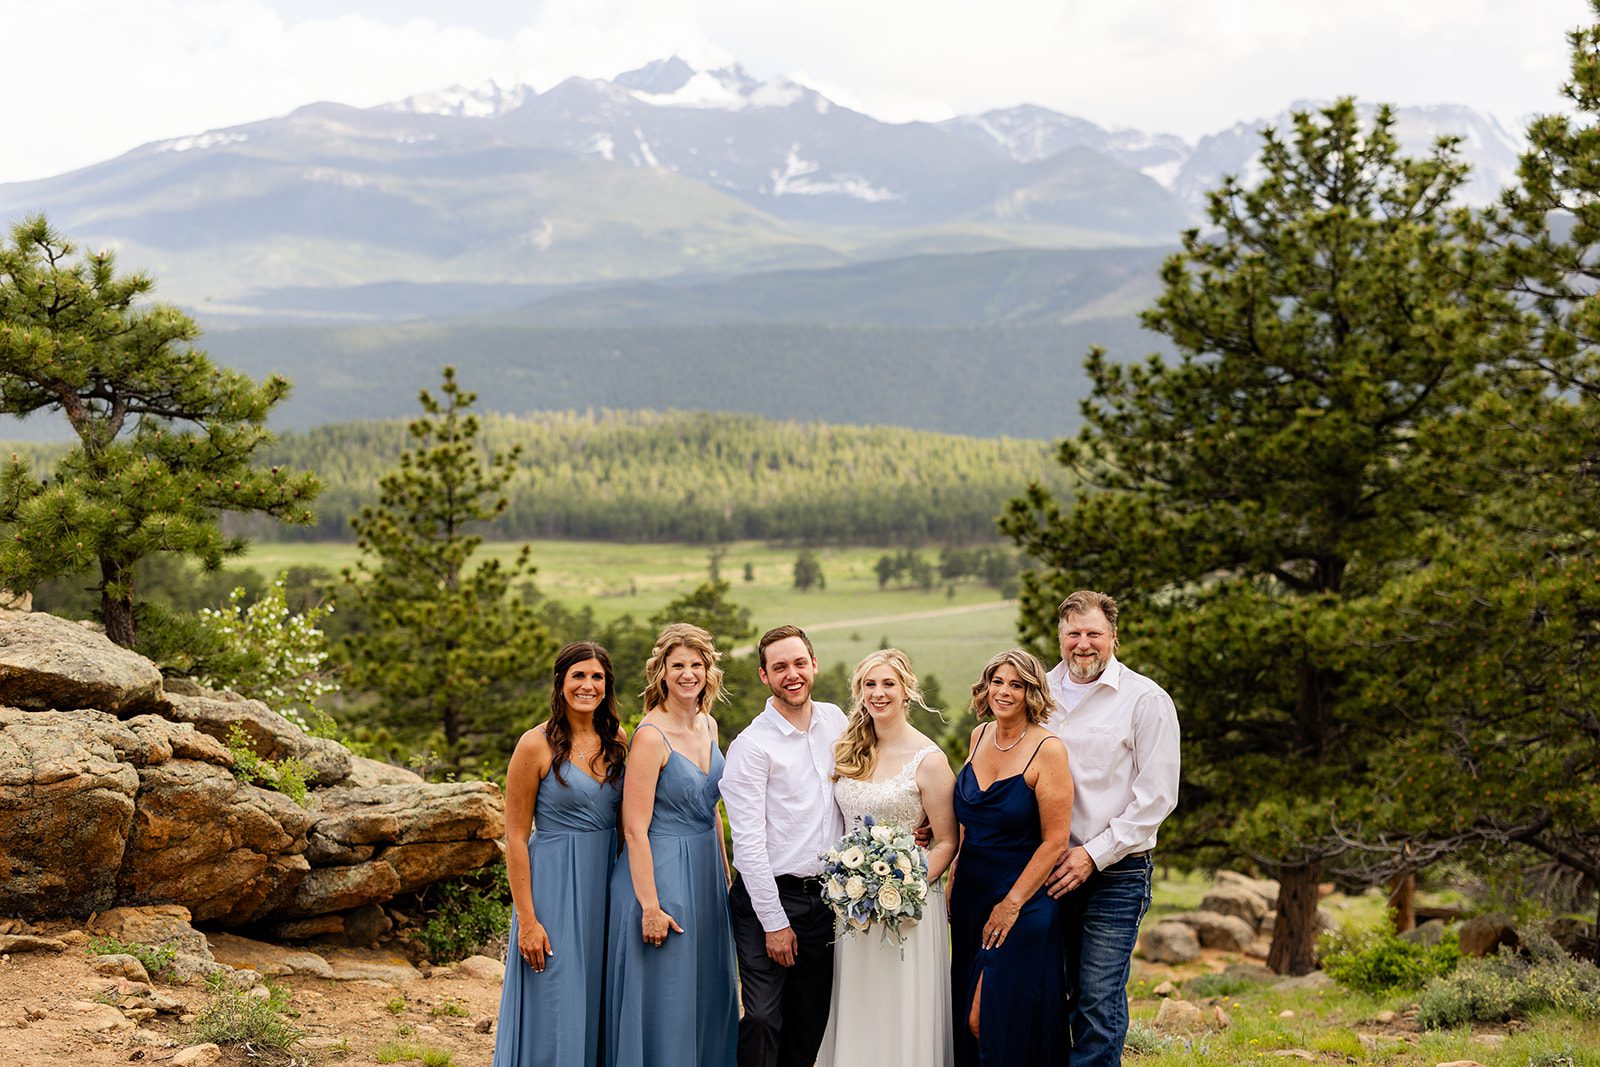 family photo with bride and groom in rocky mountain national park, after summer elopement.